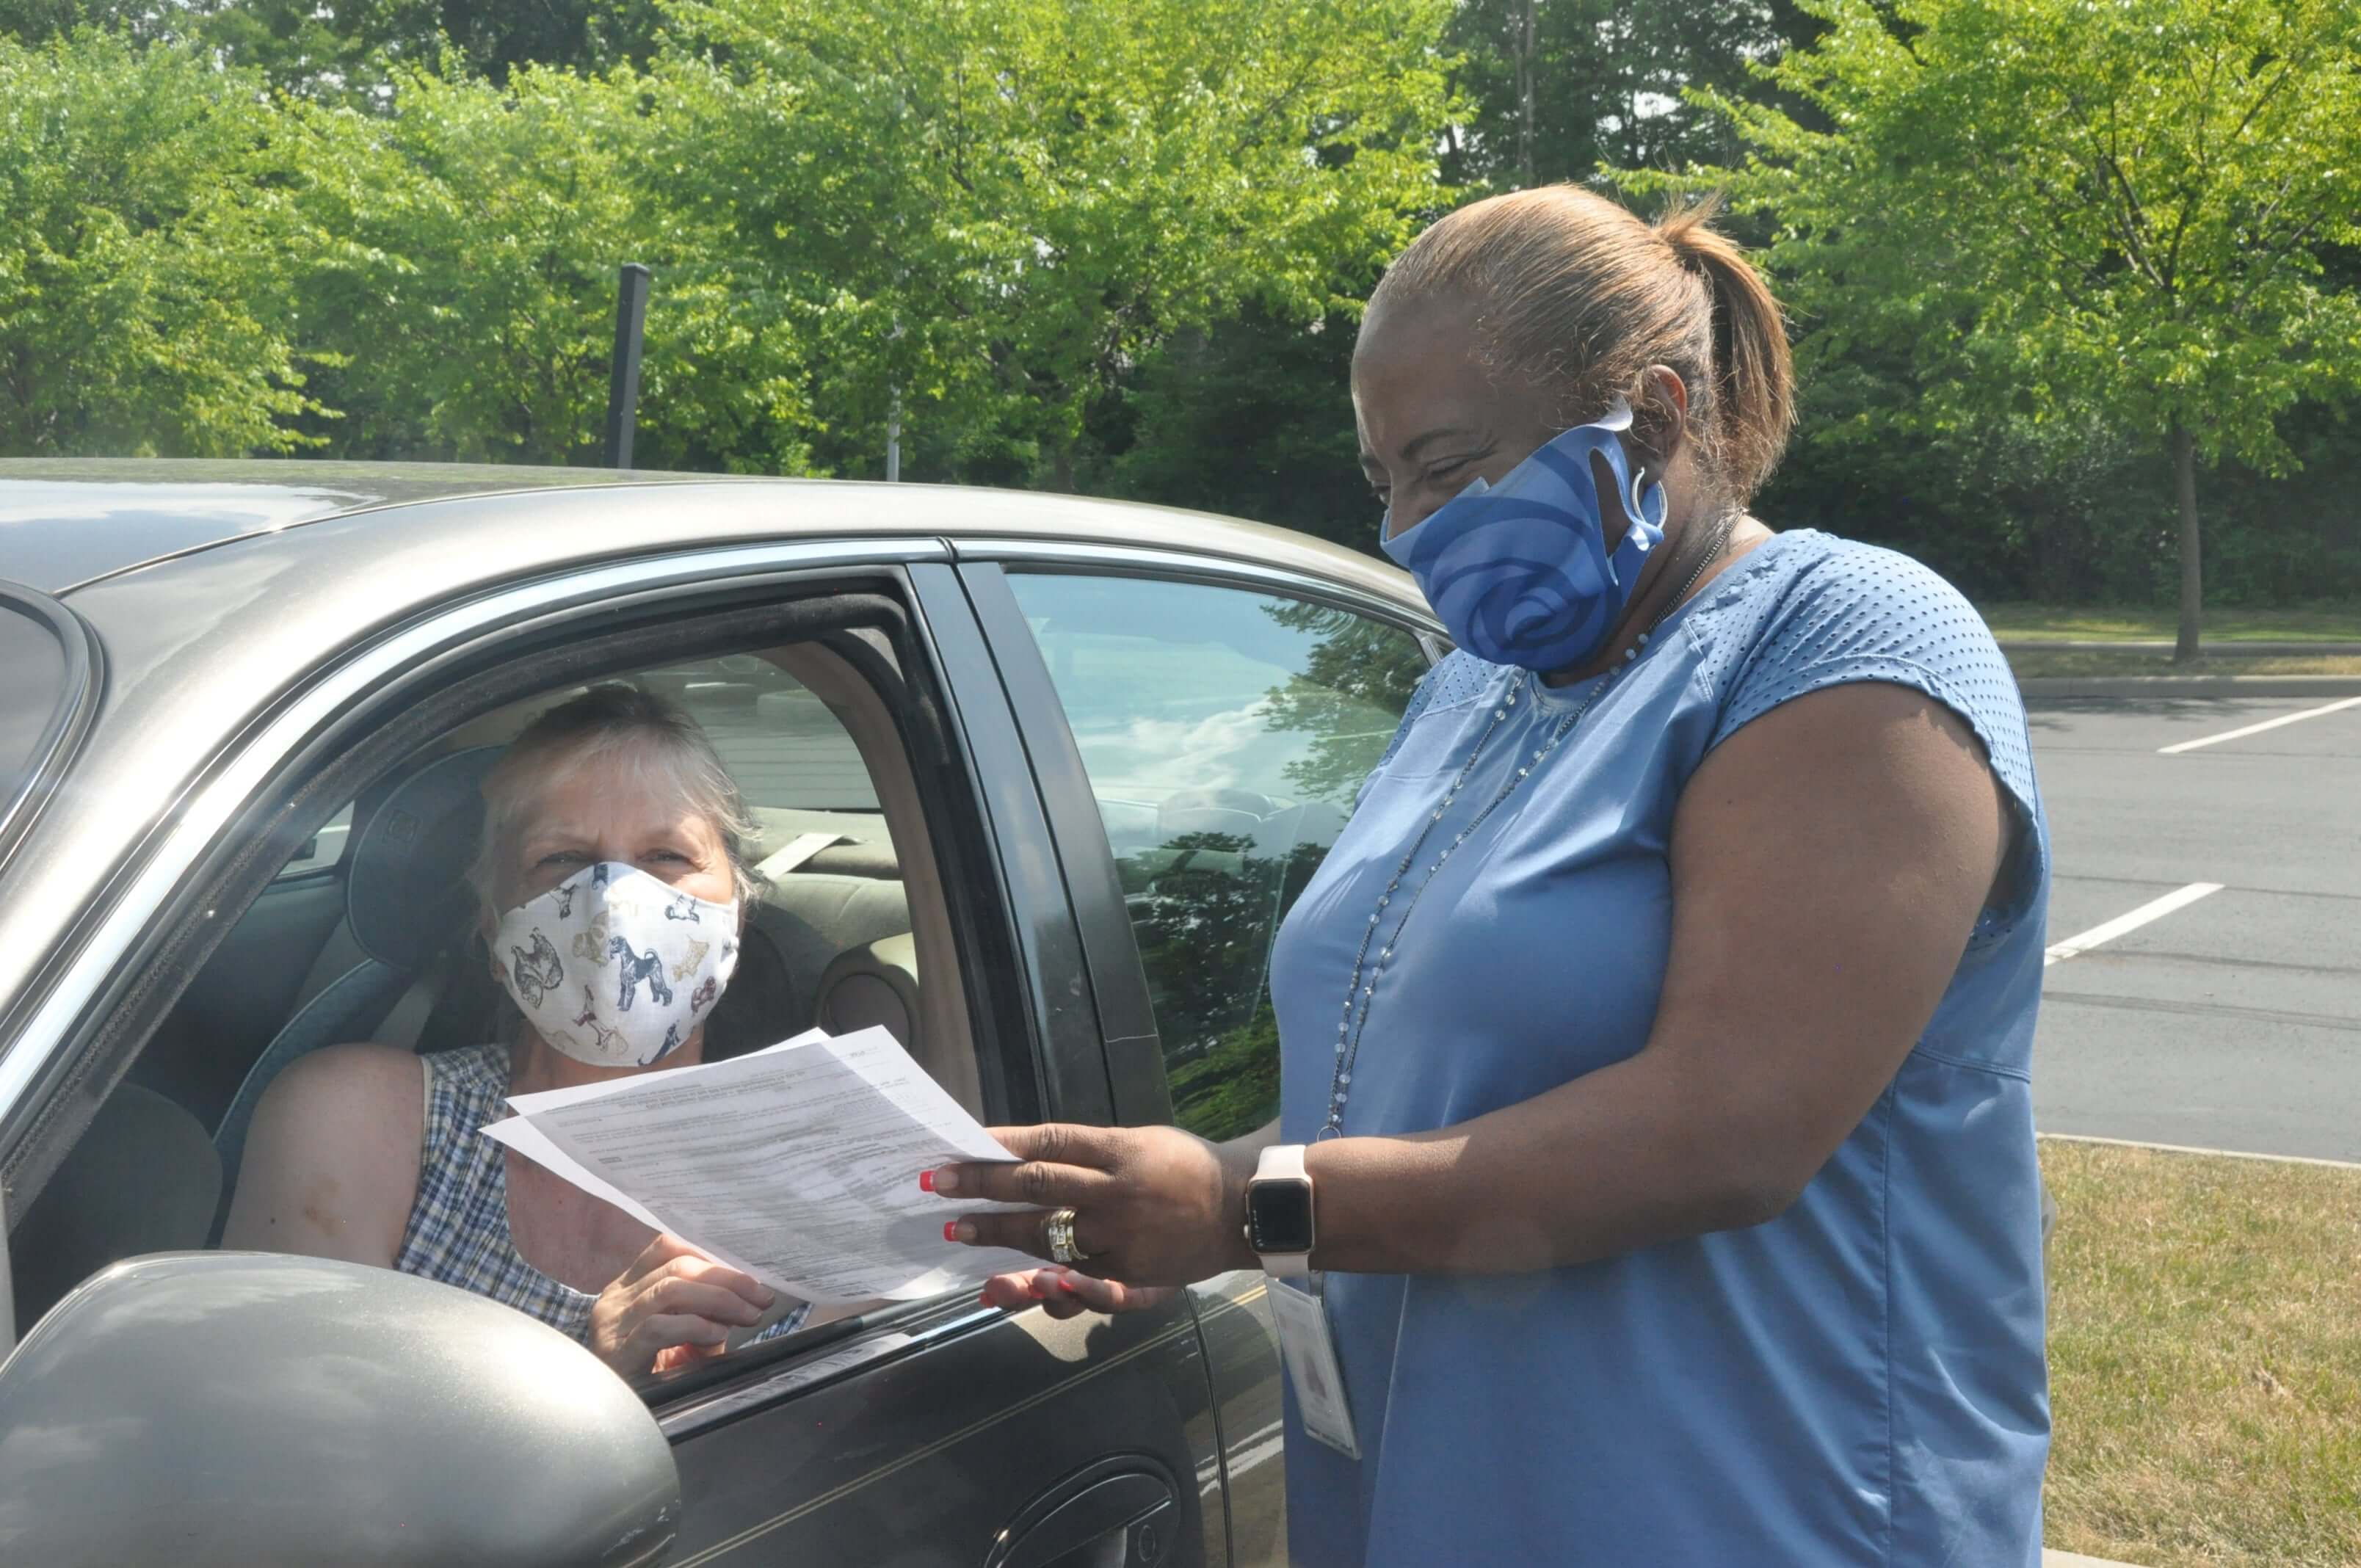 A Benjamin Rose employee passing documents to a woman in a car